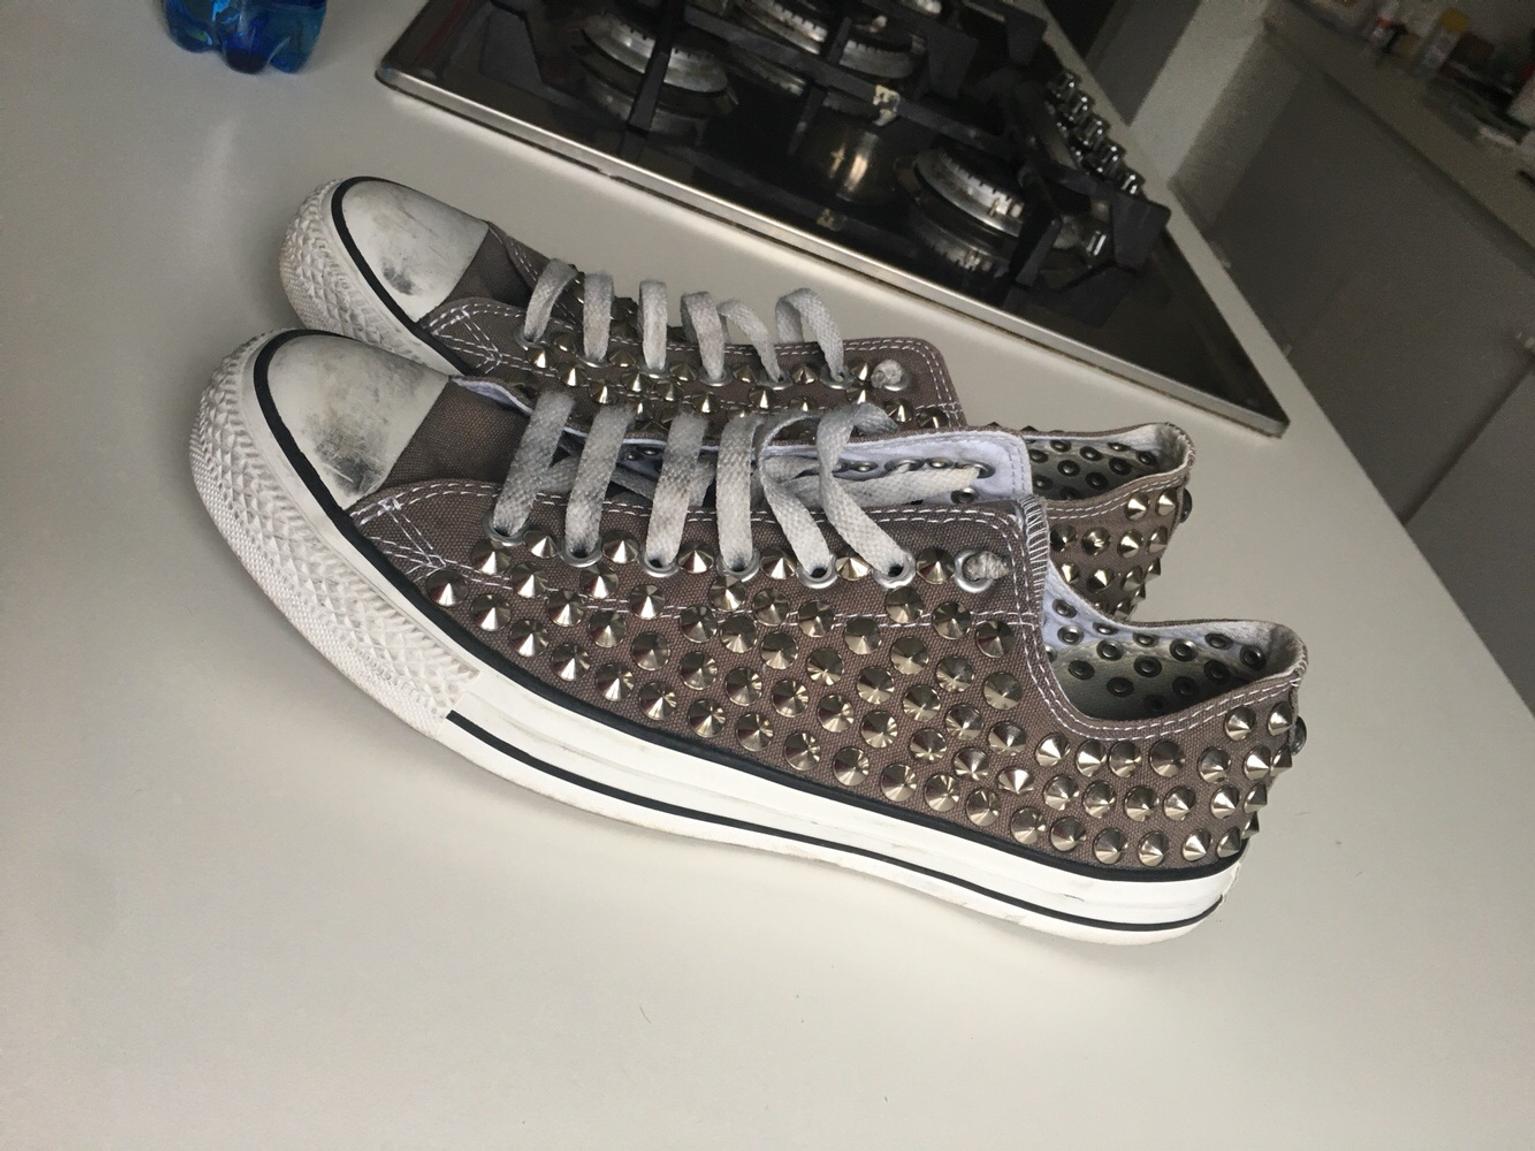 Converse All Star borchie in 19033 Colombiera-molicciara for €40.00 for  sale | Shpock